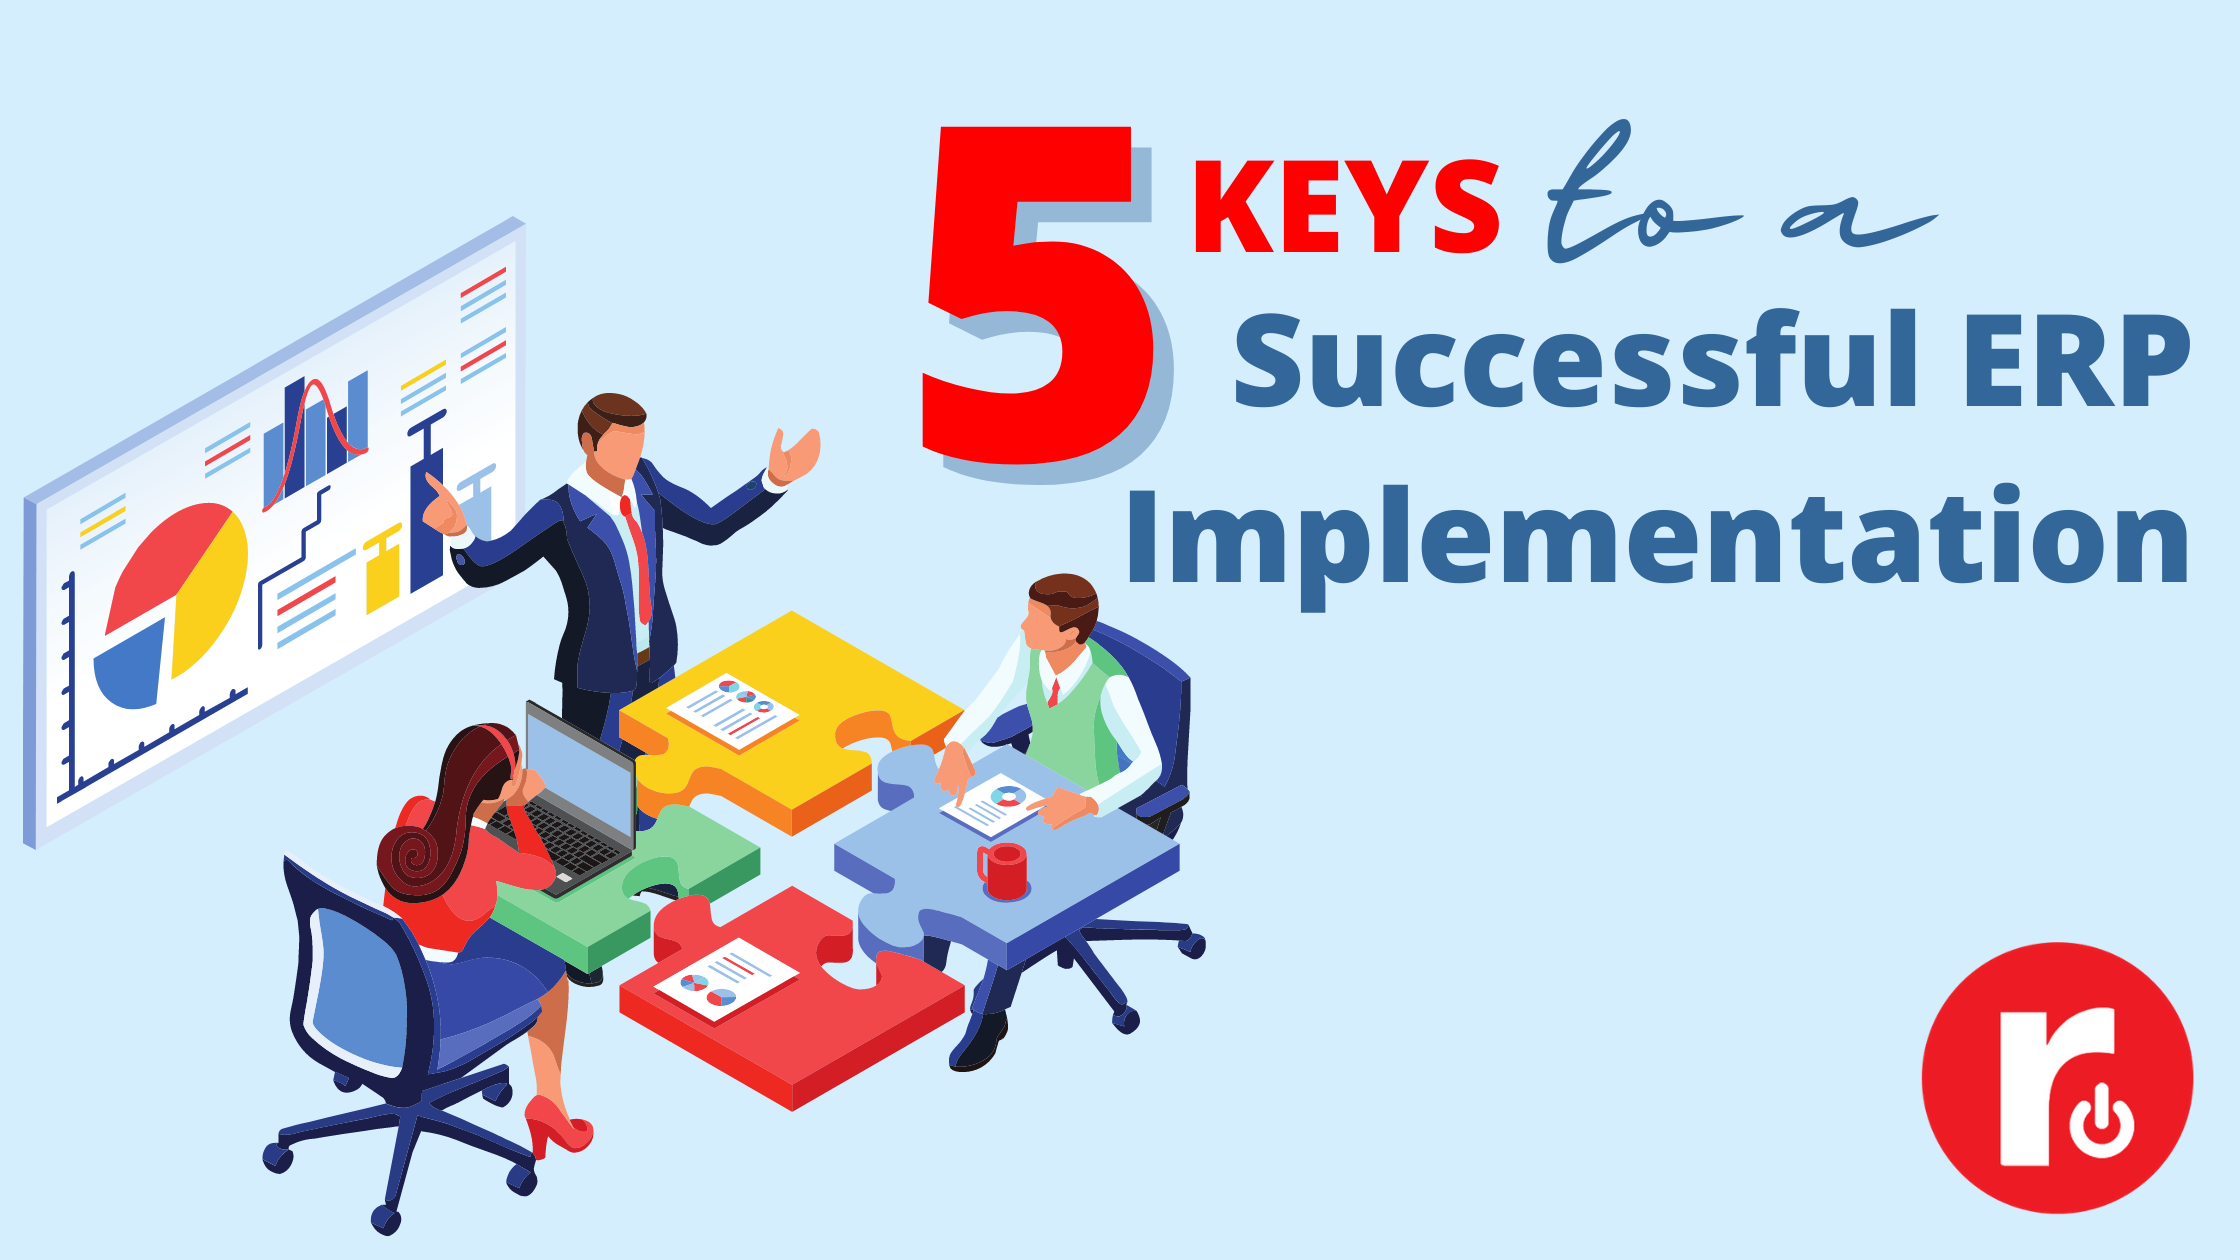 5 Keys to a Successful ERP Implementation